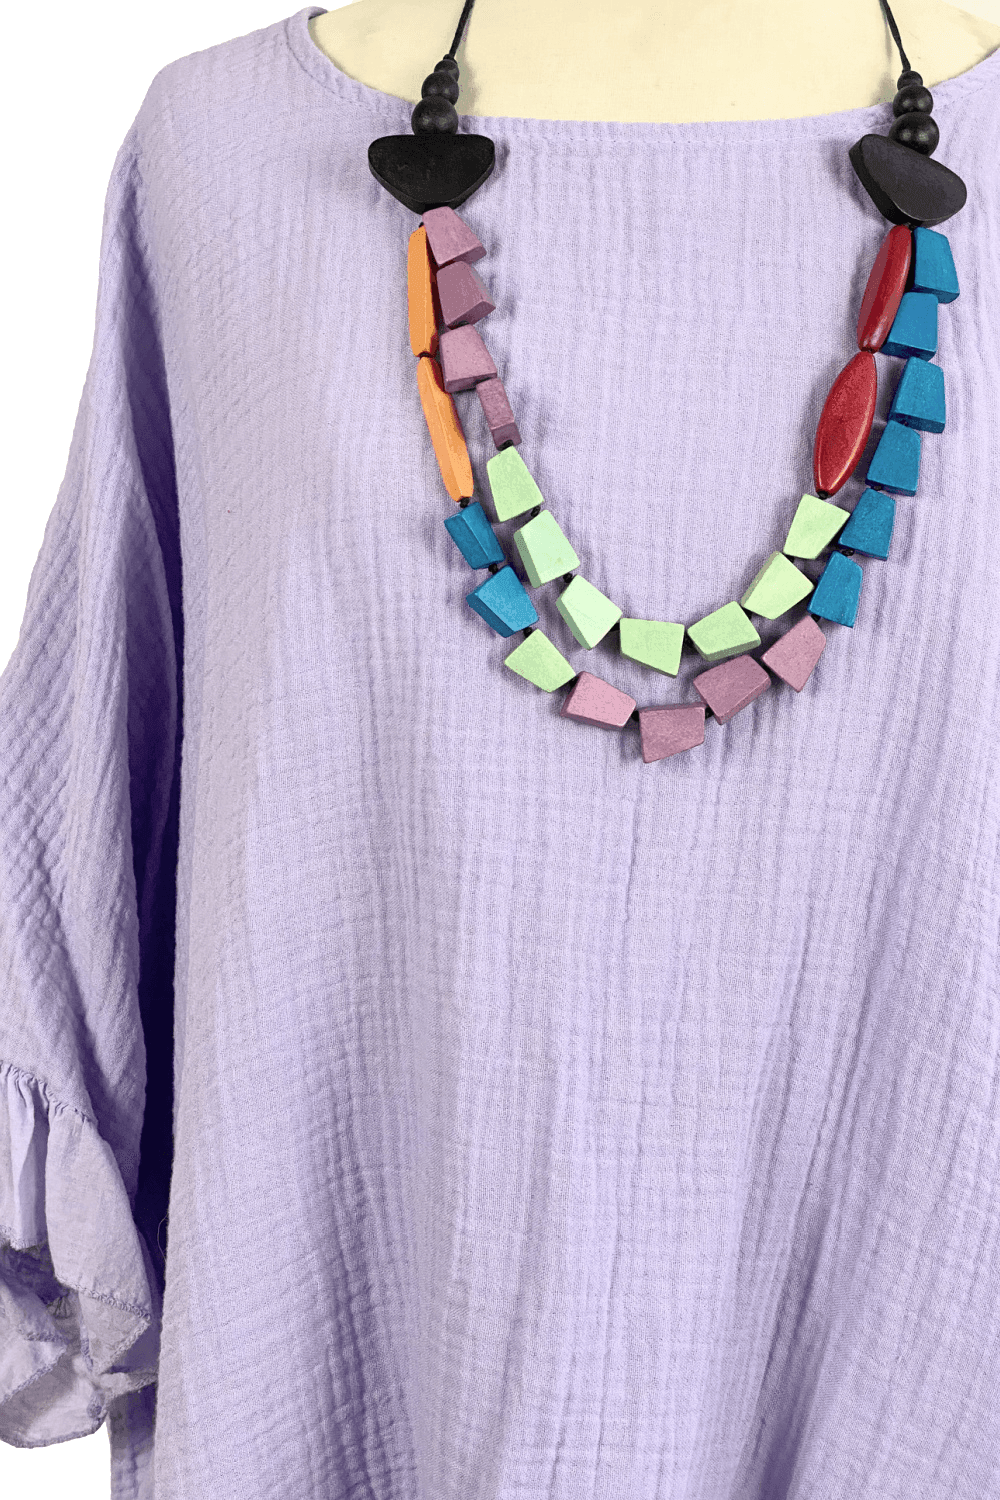 Pretty women's necklace in multiple colors styled over a soft lavender cotton top. 